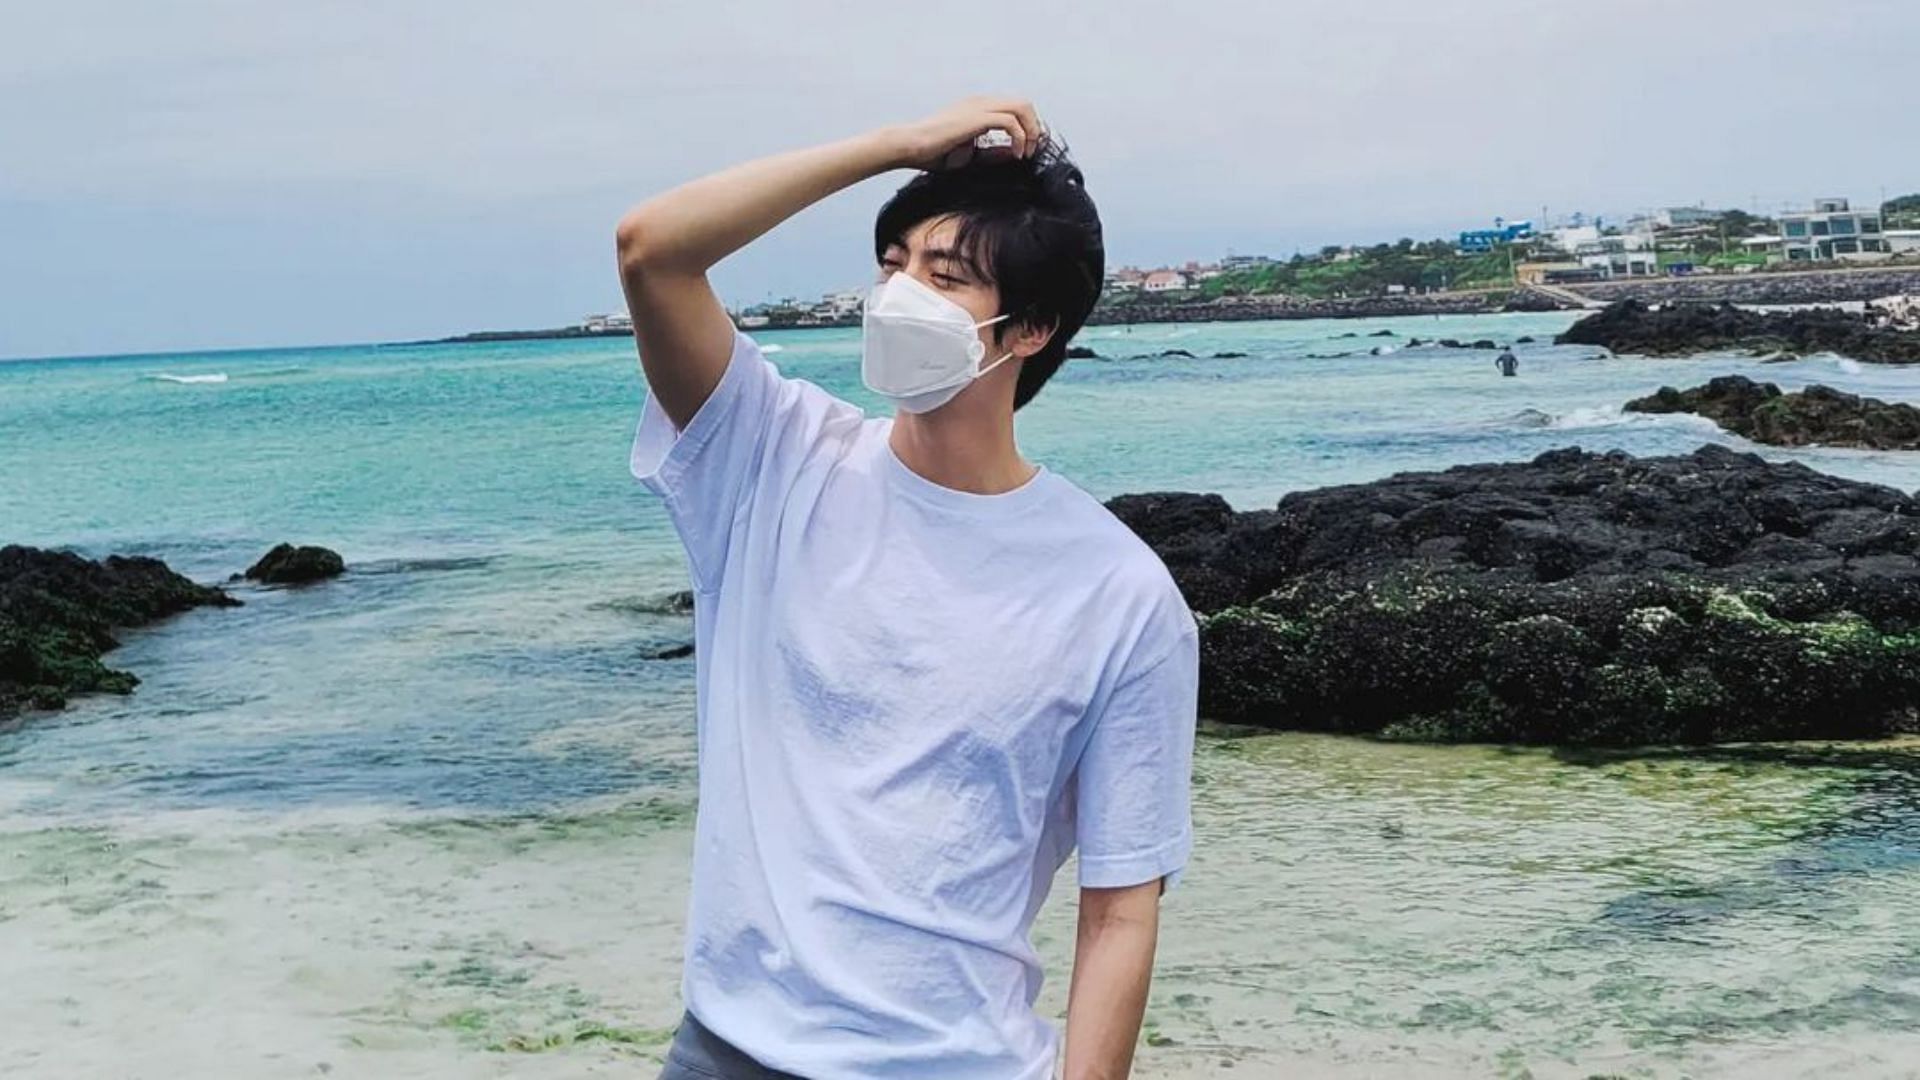 BTS' Jin gets brave and posts shirtless photo at the beach that ARMYs can't  stop gushing over